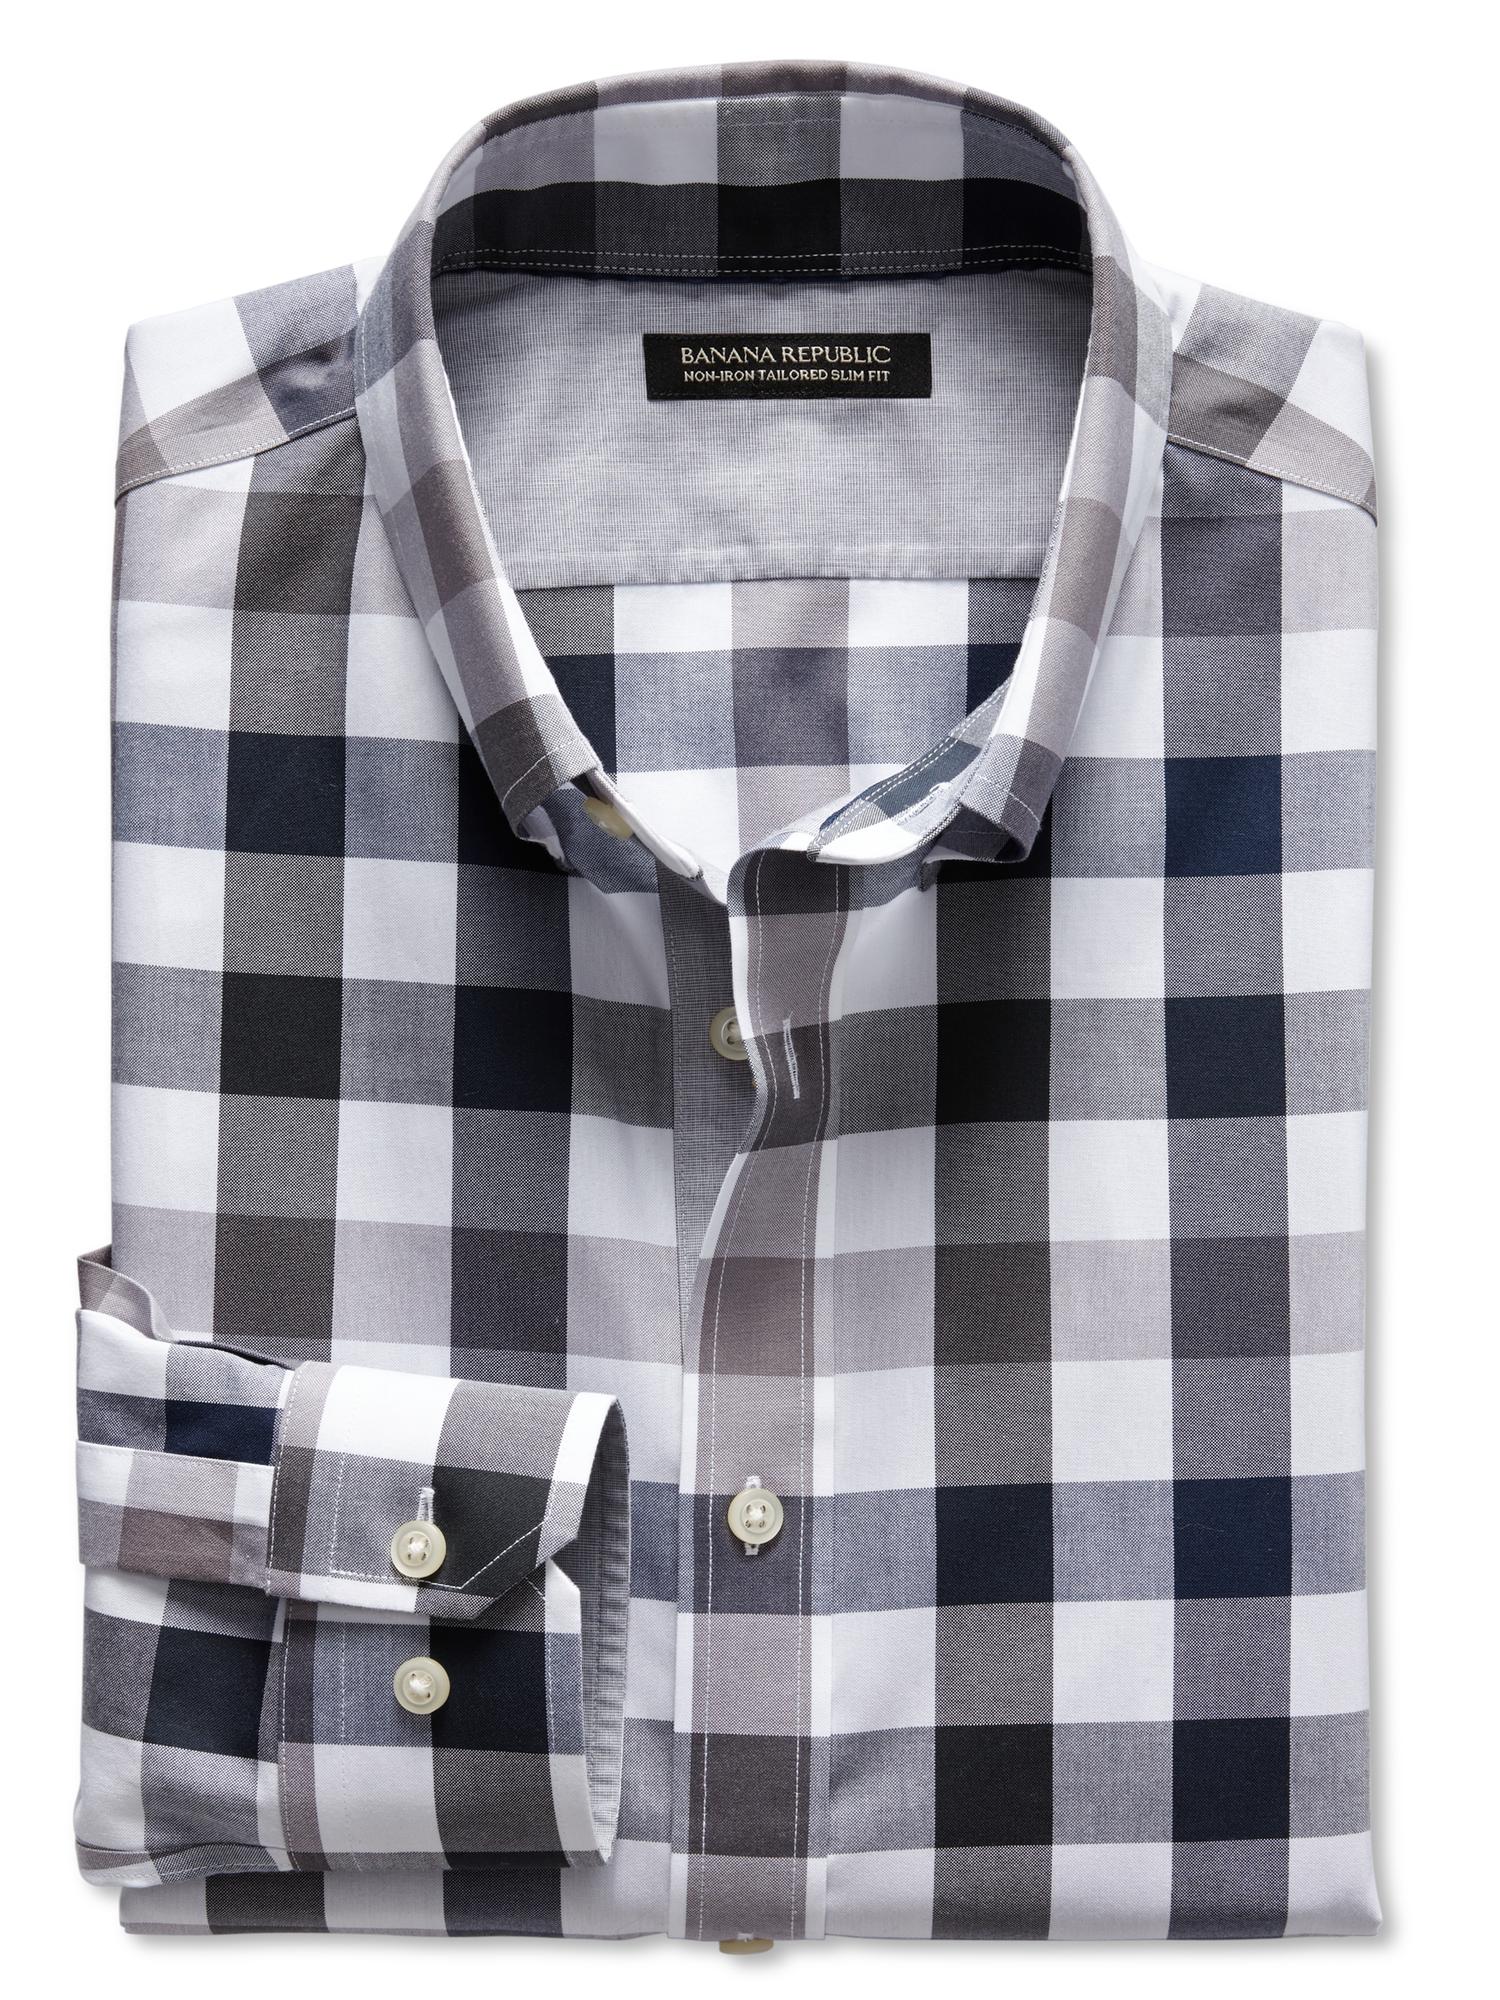 Tailored Slim-Fit Non-Iron Gingham Shirt